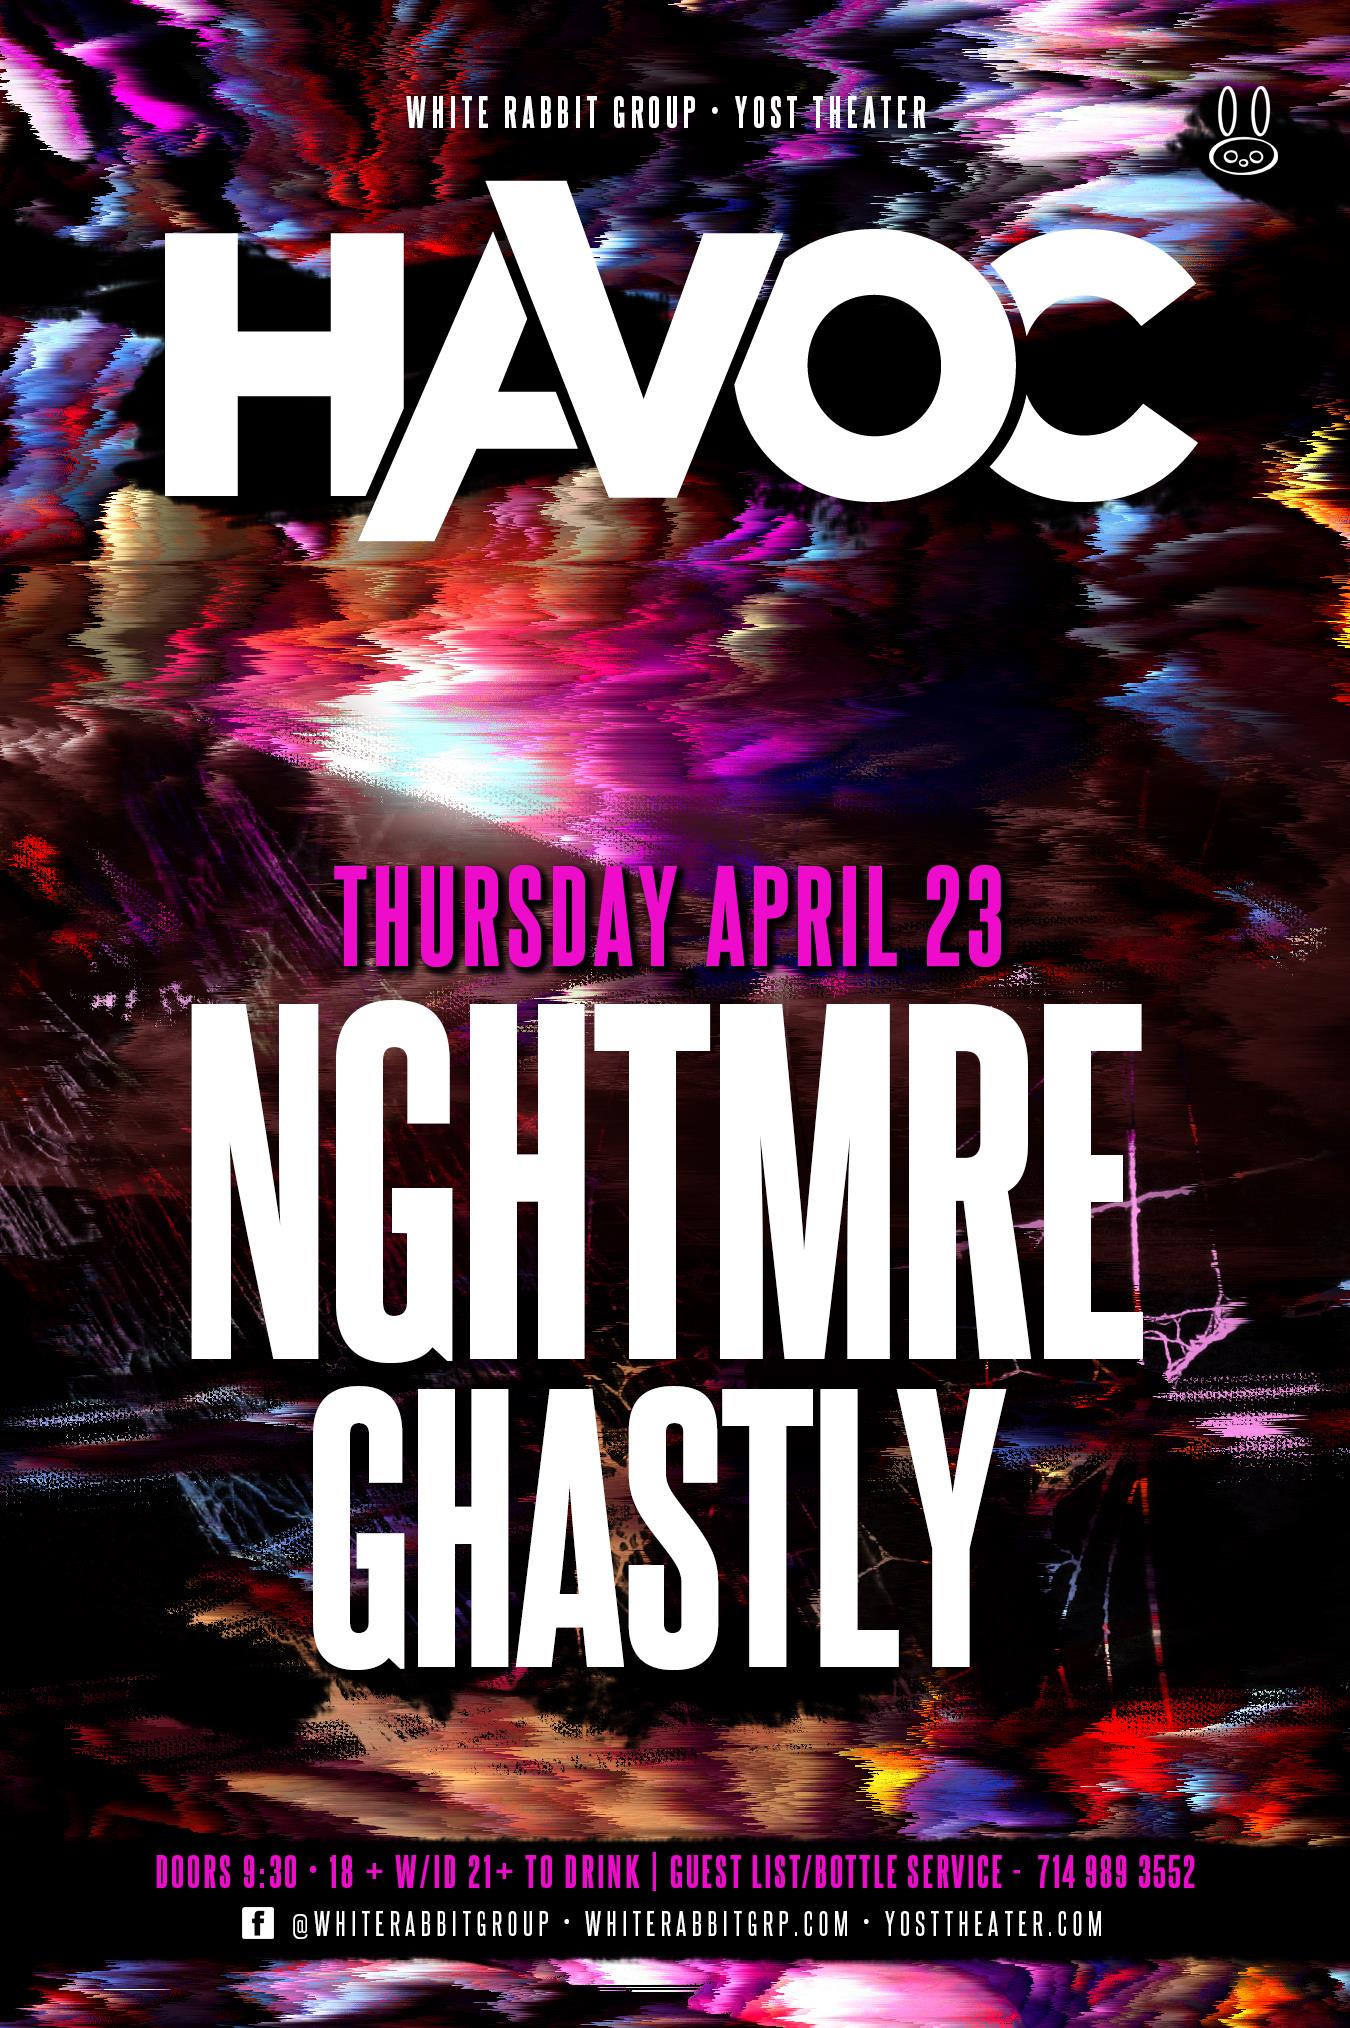 NGHTMRE + Ghastly - April 23 (Yost Theater, Santa Ana)